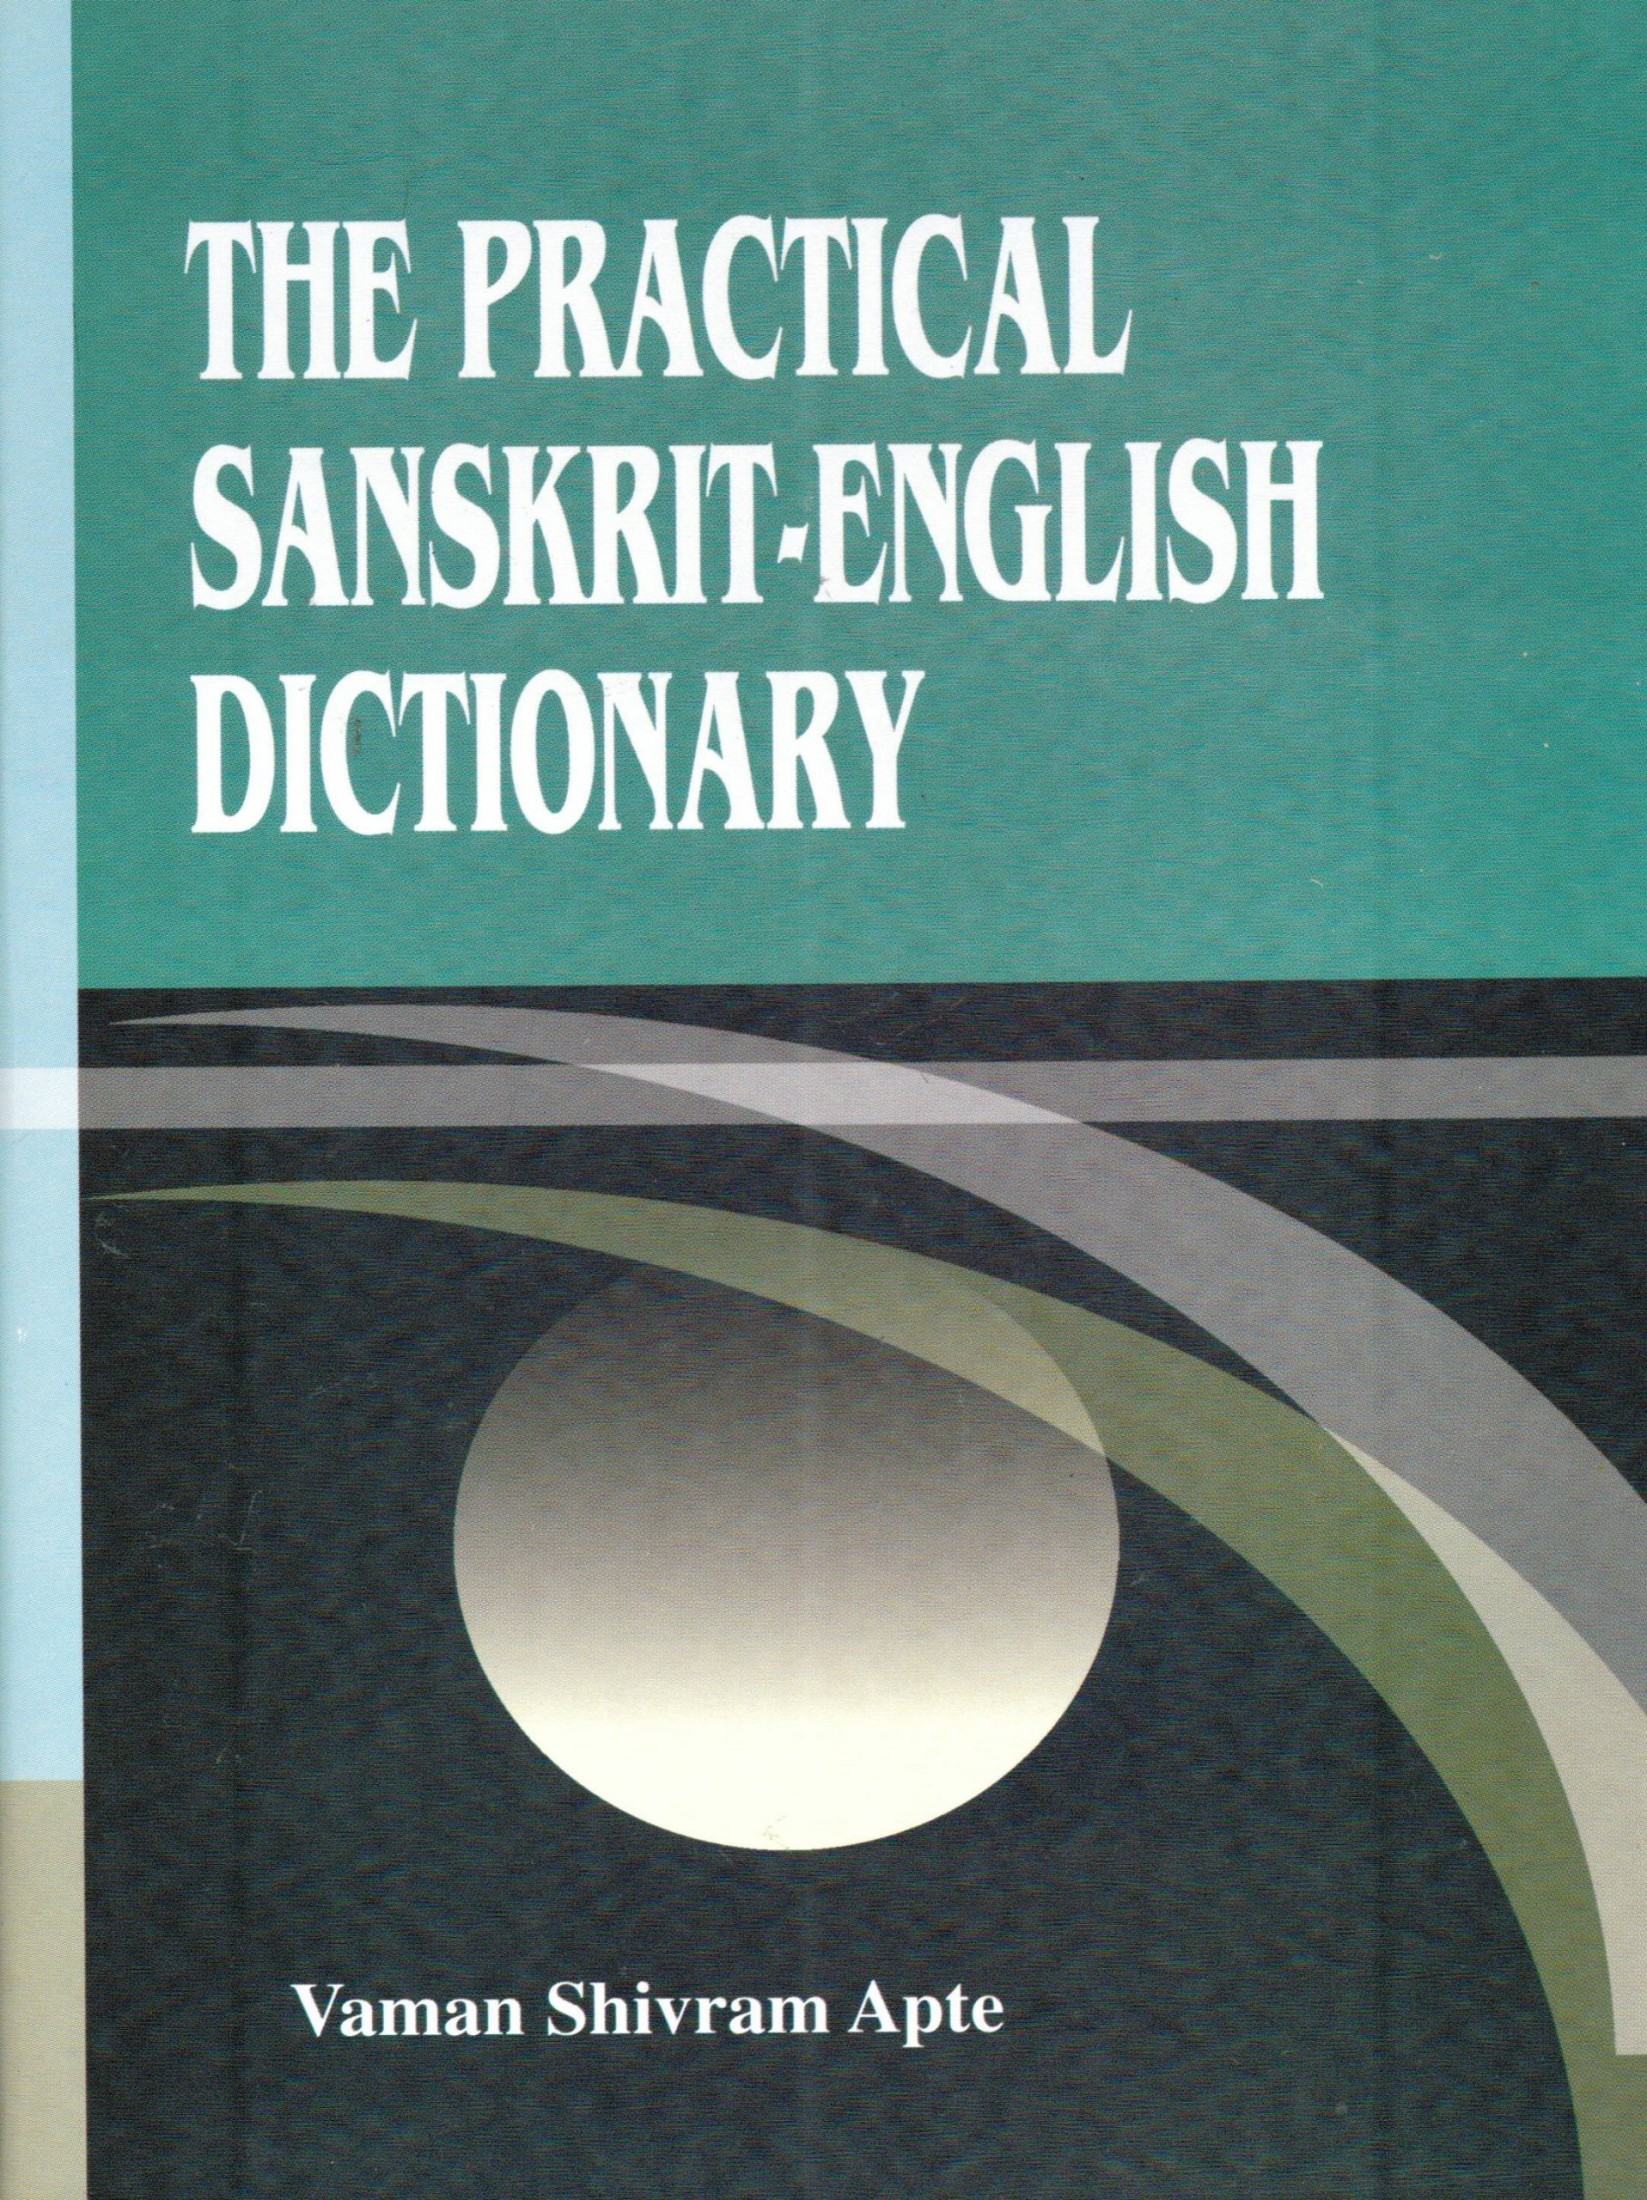 The Practical Sanskrit-English Dictionary: Containing Appendices on Sanskrit Prosody and Important Literary & Geographical Names in the Ancient History of India